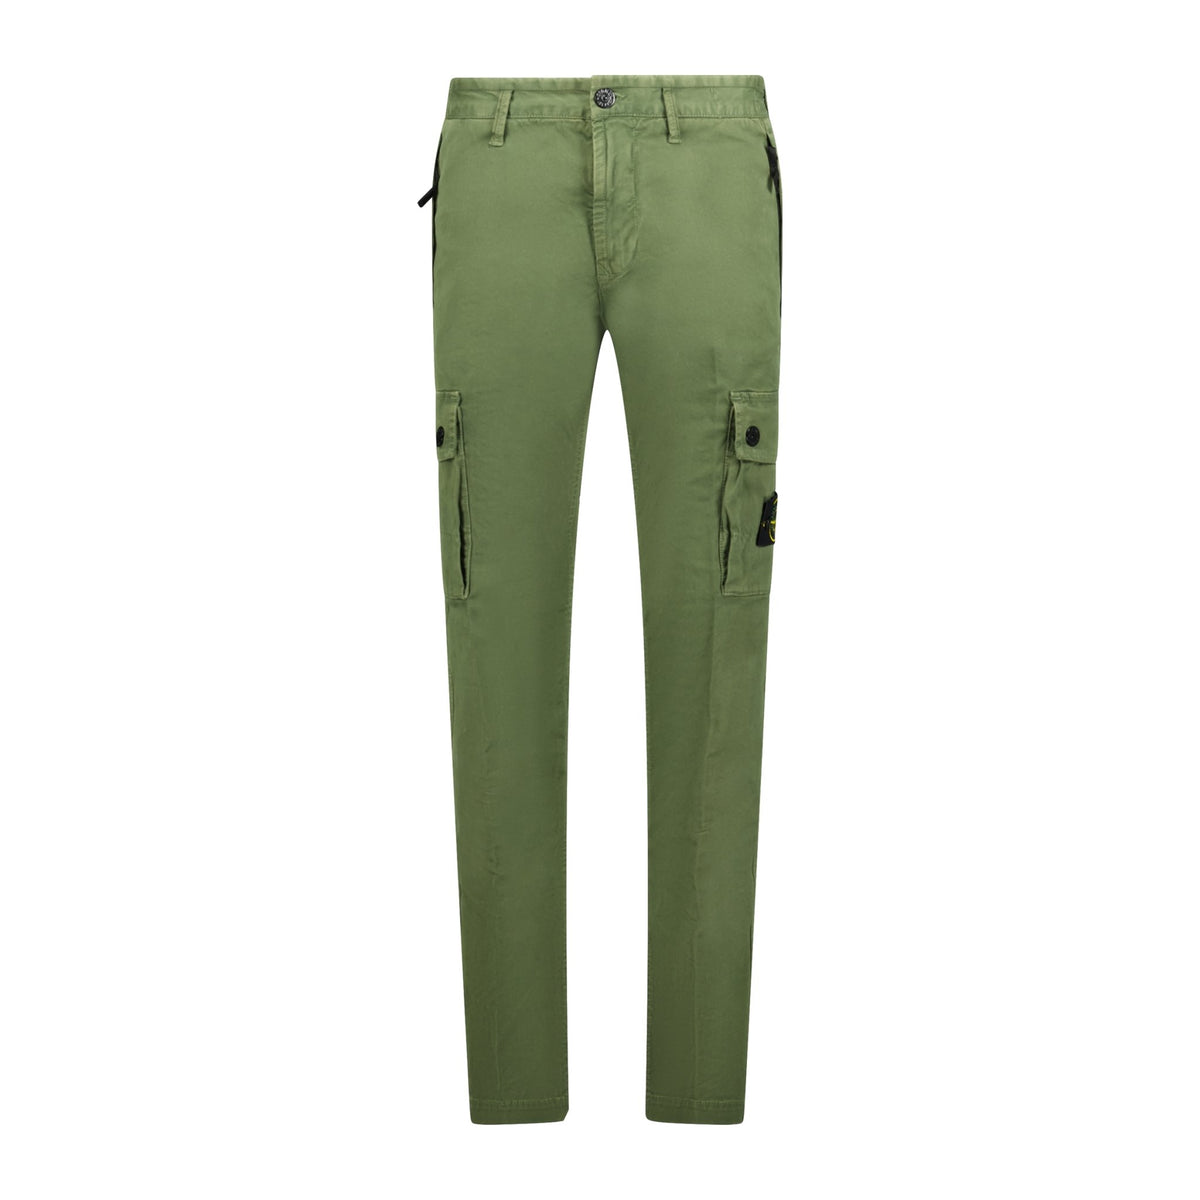 Stone Island Compass Logo-patch Padded Wide-leg Trousers in Green for Men